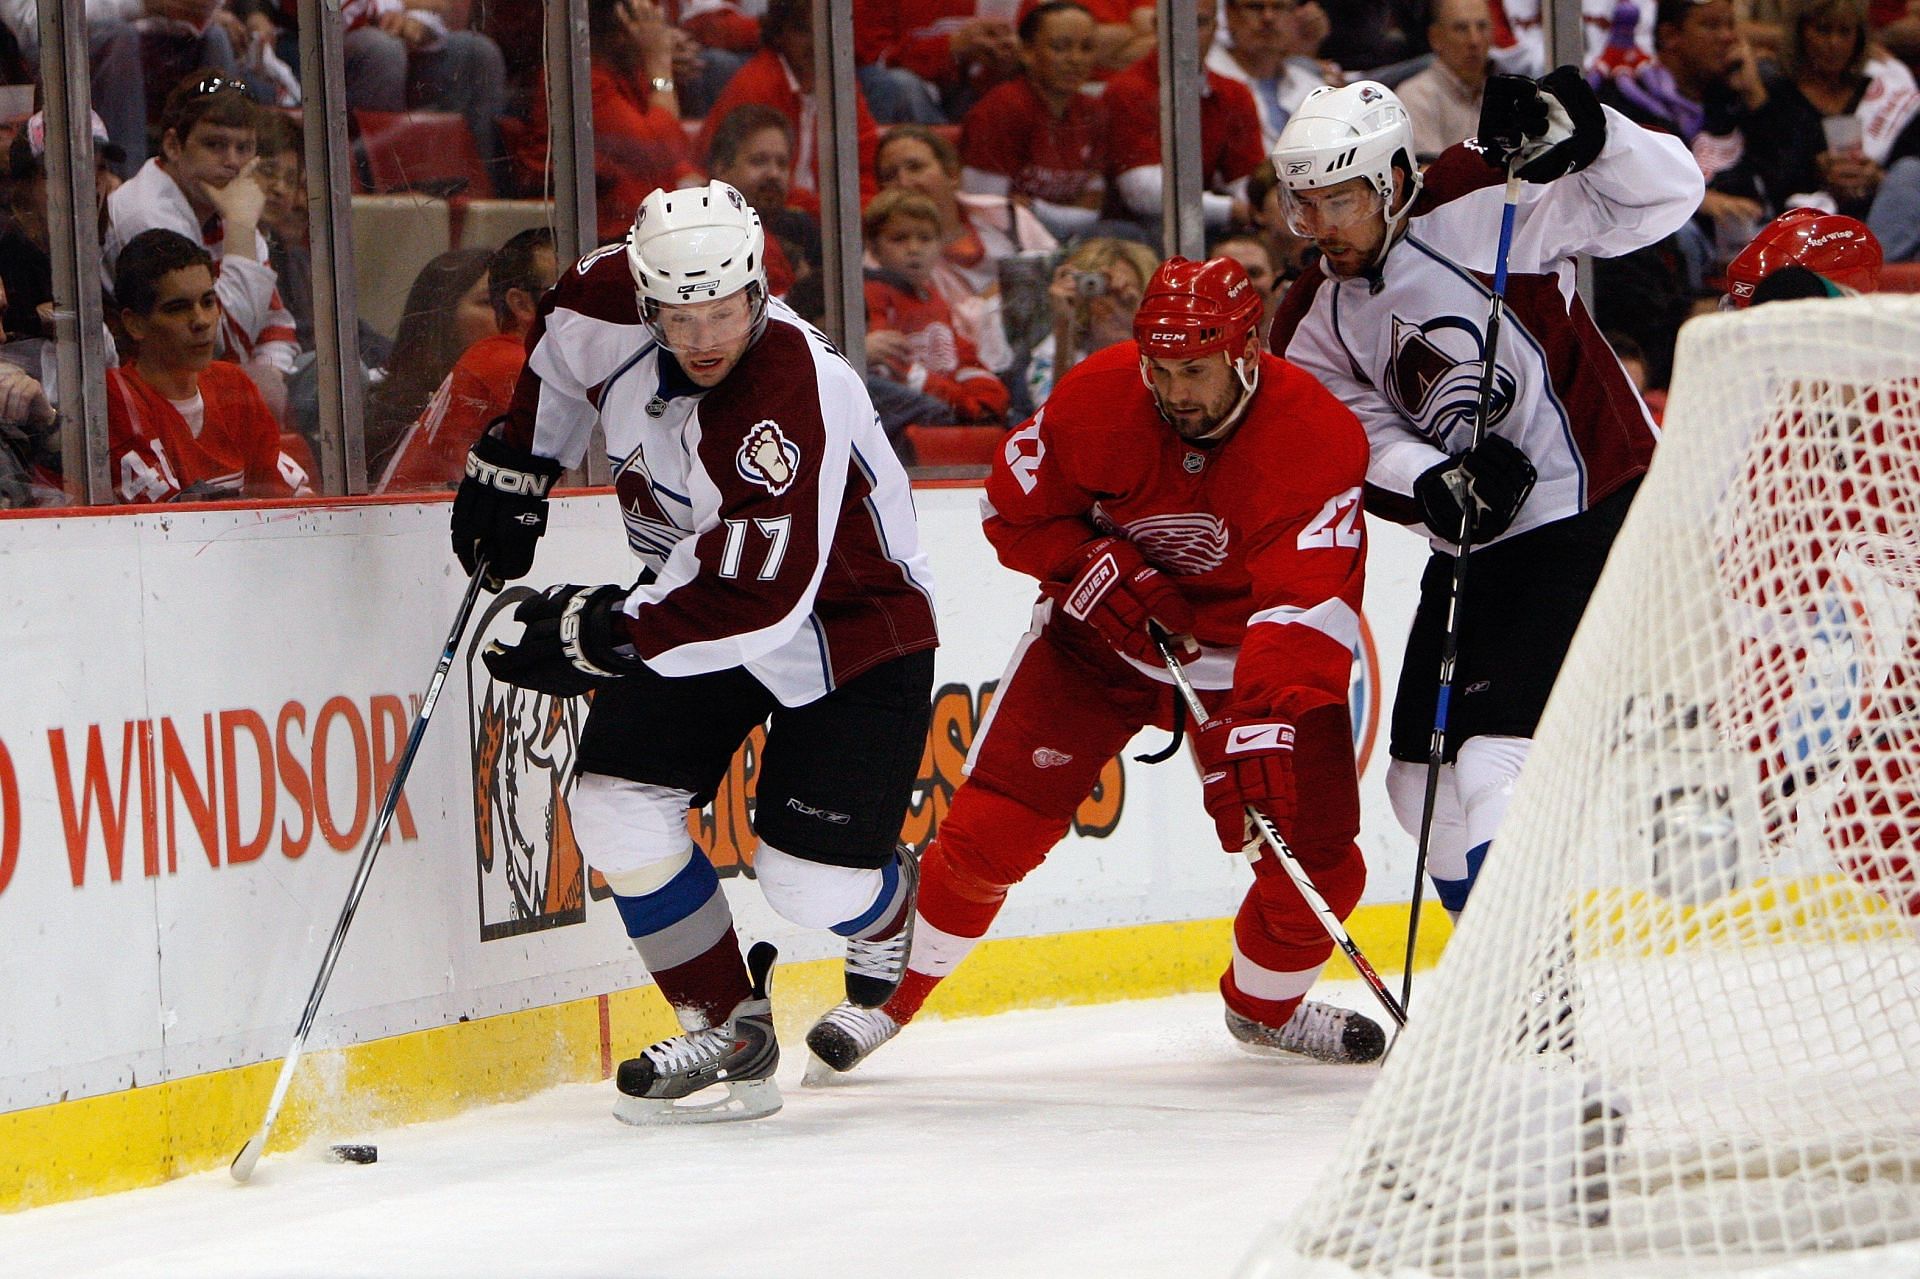 Colorado Avalanche v Detroit Red Wings